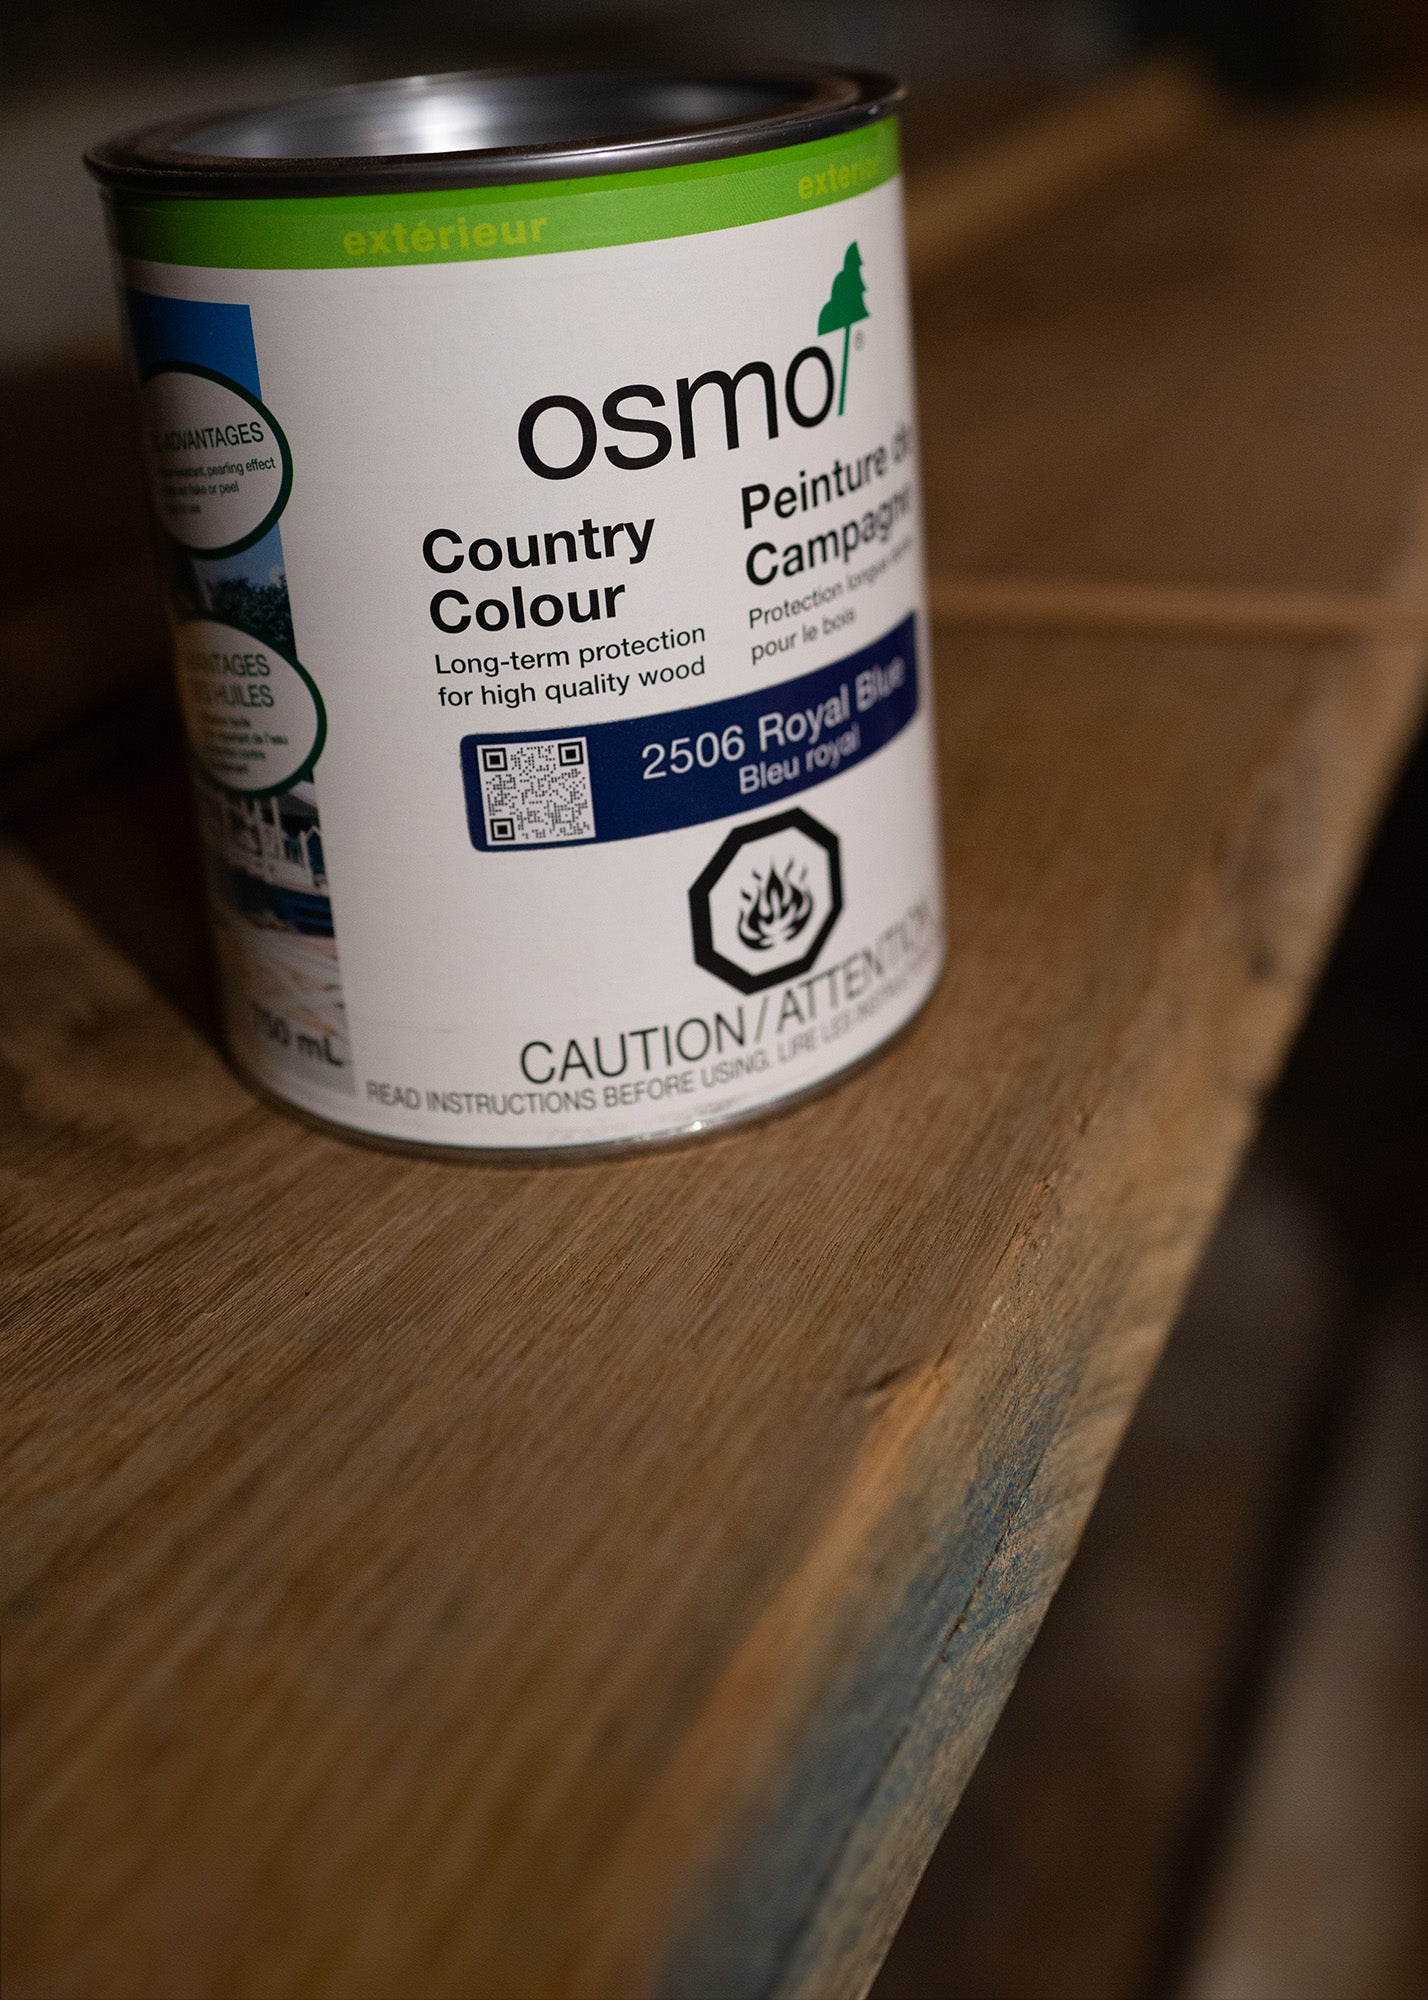 A small can of Osmo country colour finish in blue.